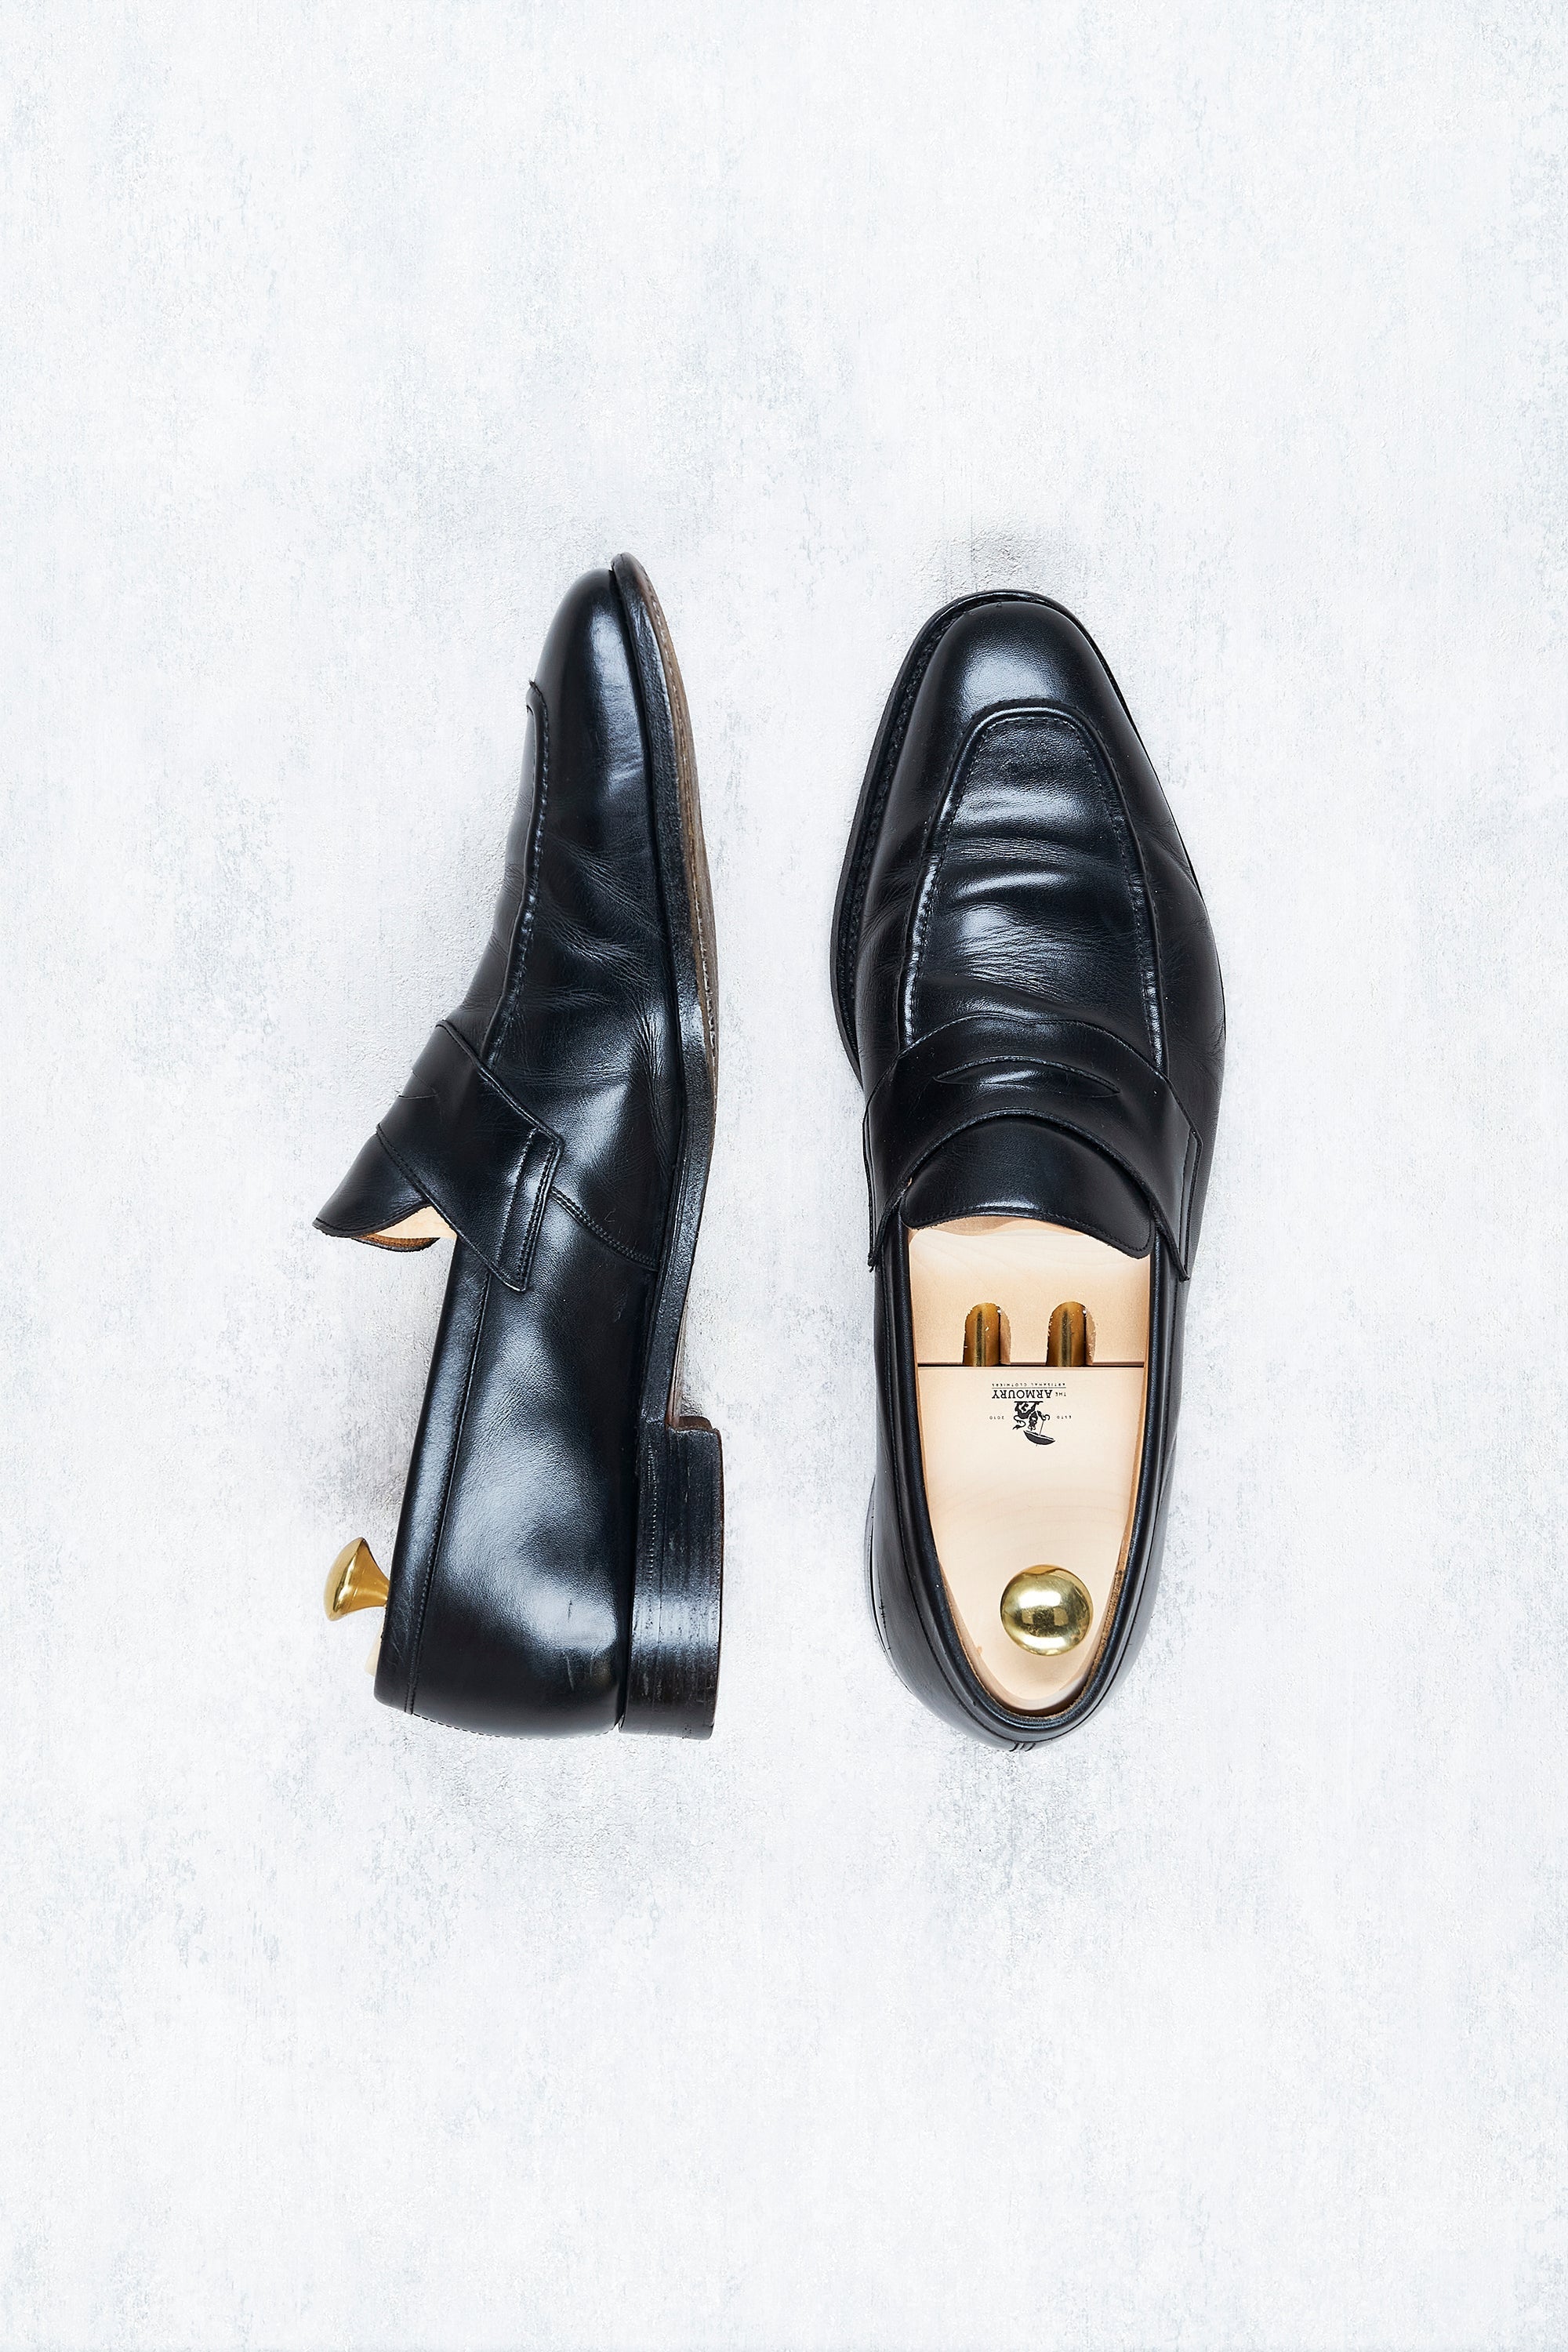 Church's Black Calf Penny Loafers